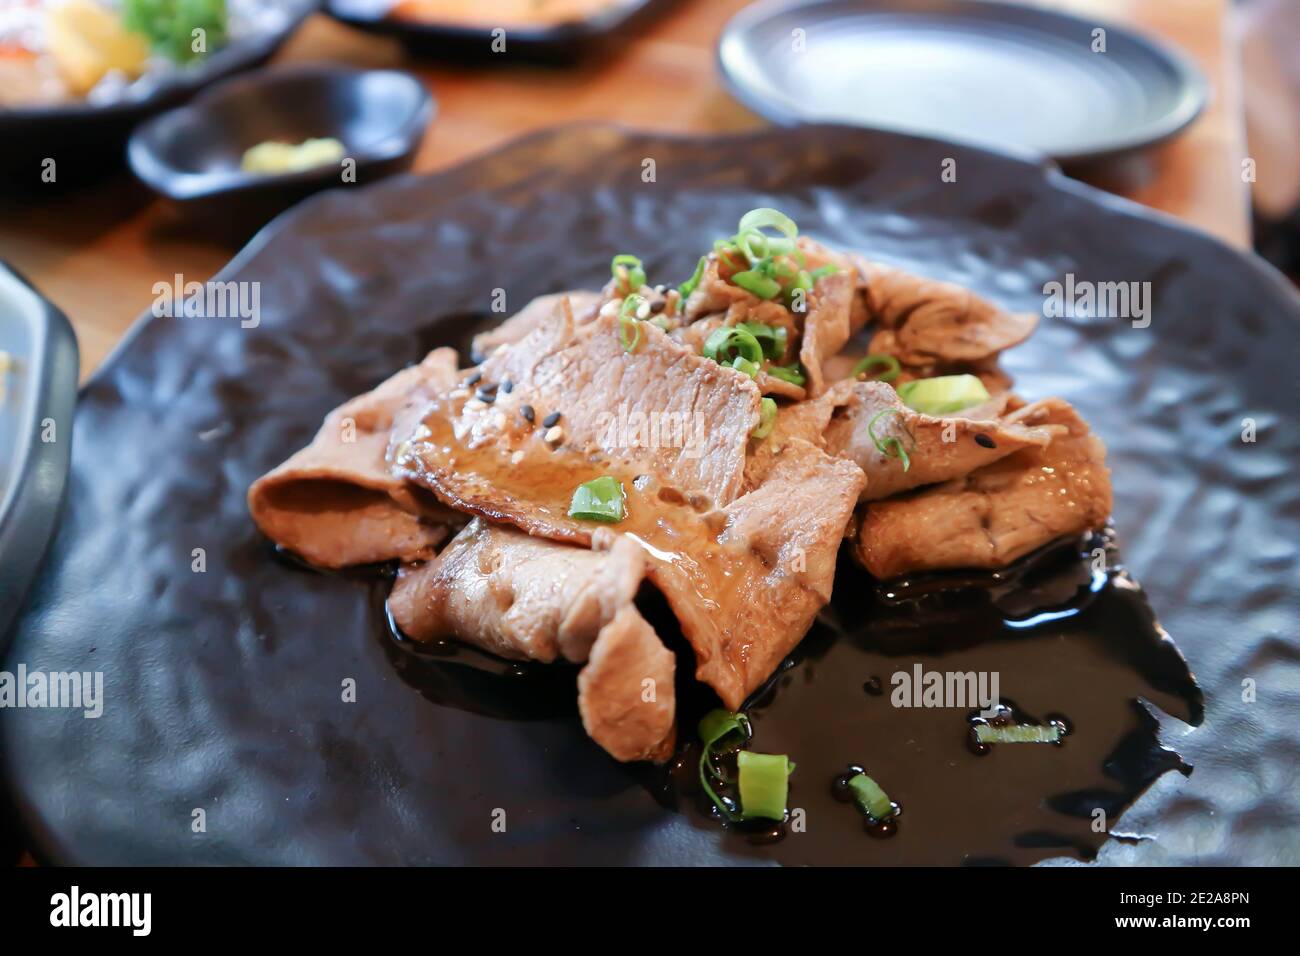 grilled beef or roasted beef ,stir fried beef Stock Photo